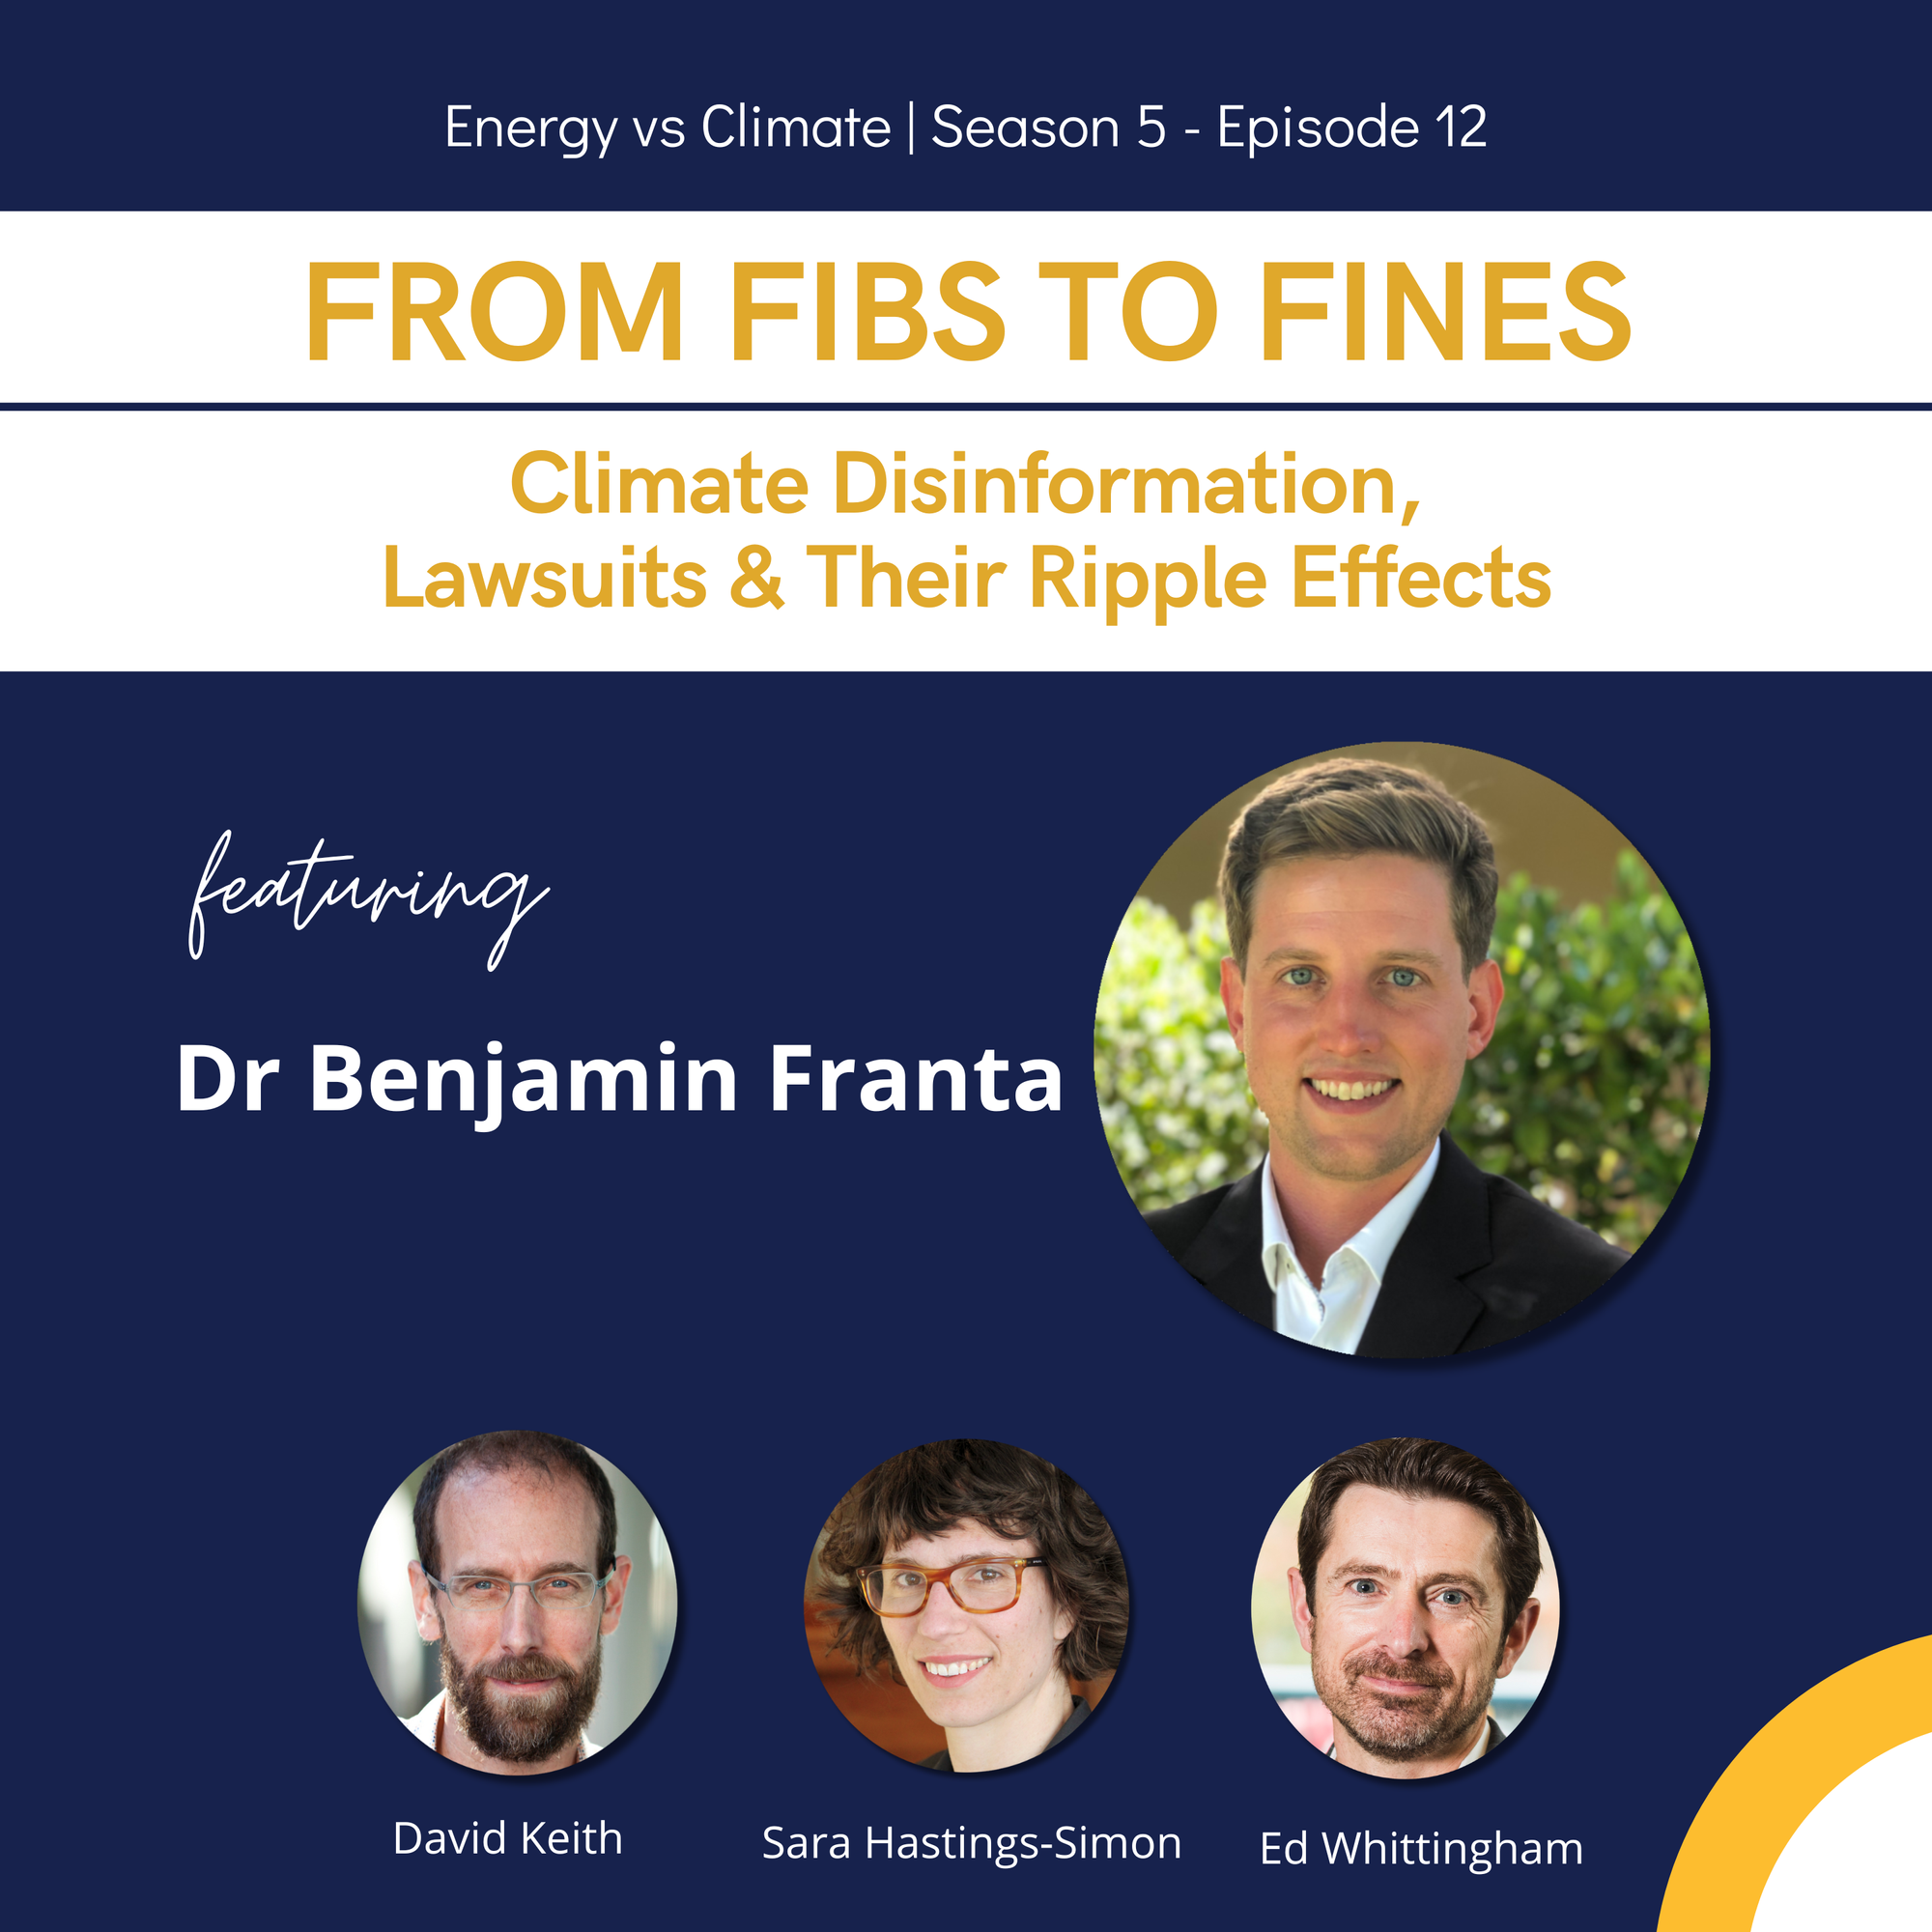 FROM FIBS TO FINES - Climate Disinformation, Lawsuits & Their Ripple Effects